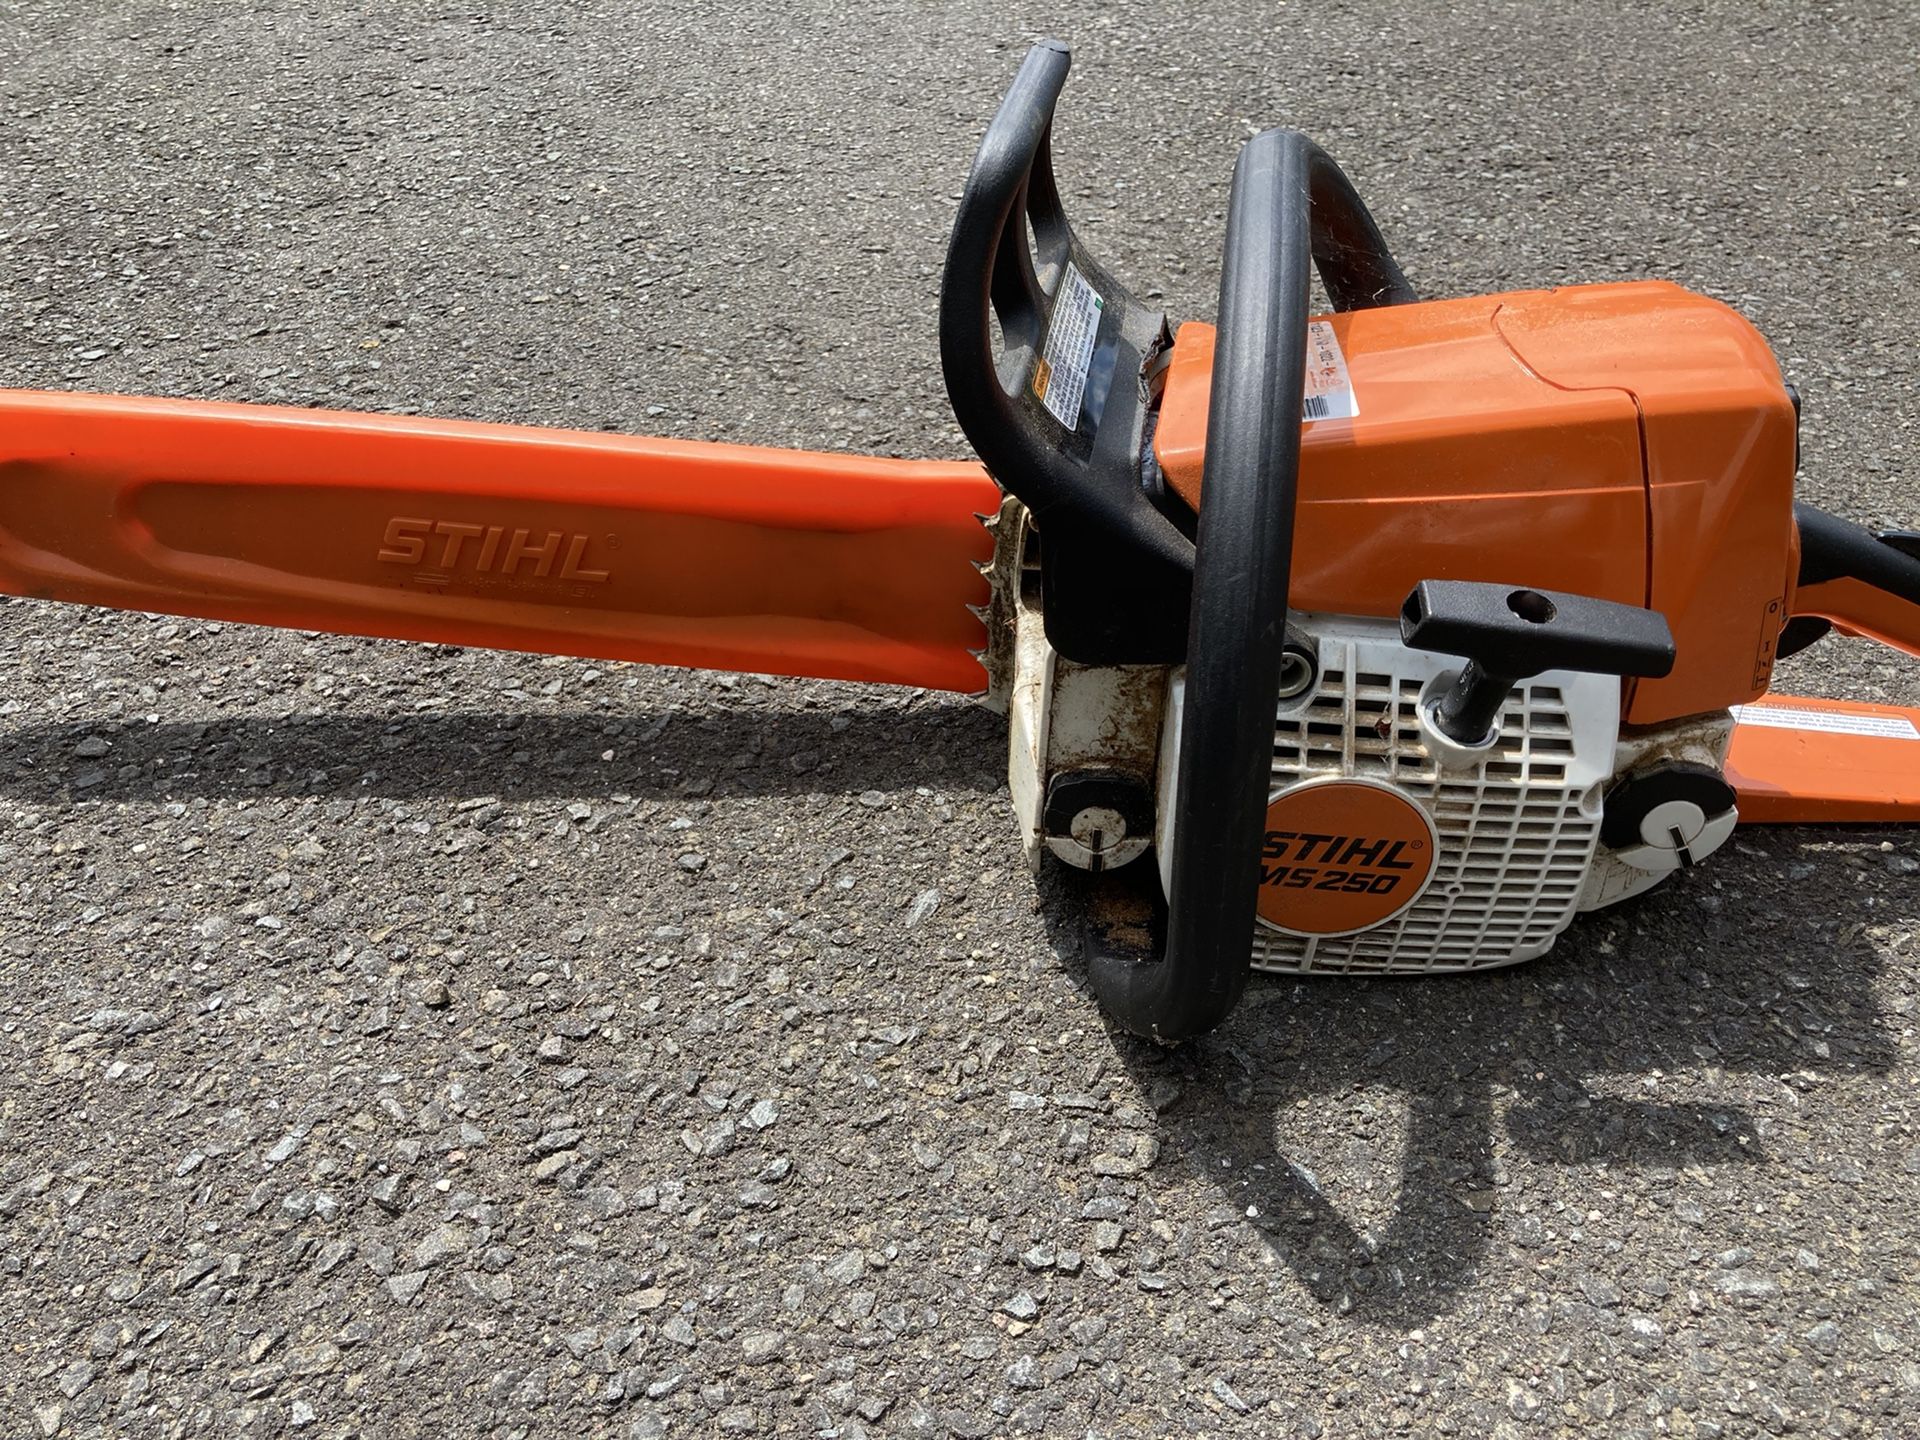 STHL ms250 chain saw sold as is